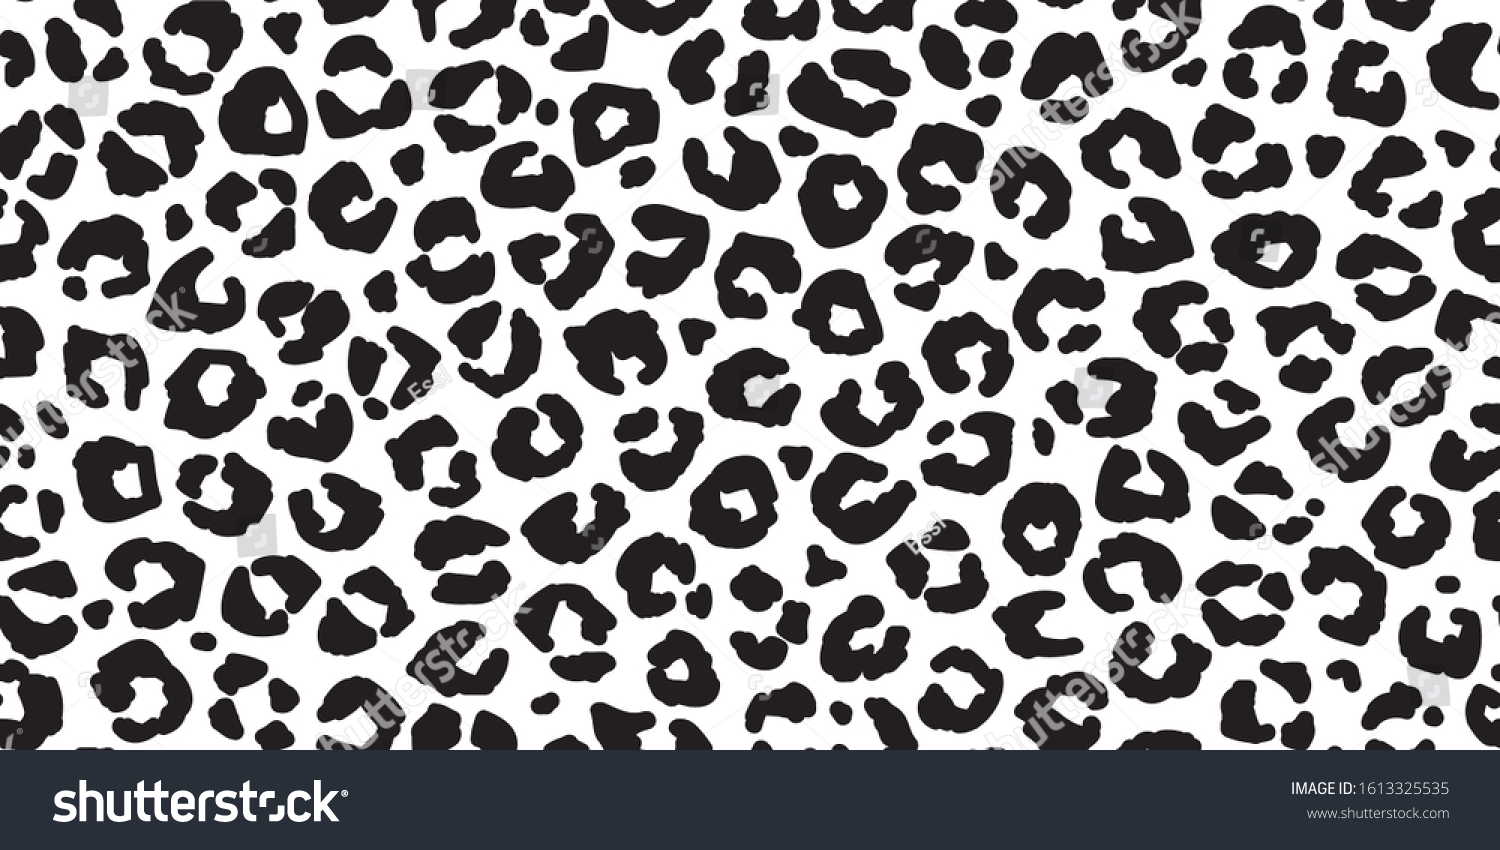 Seamless leopard fur pattern. Fashionable wild leopard print background. Modern panther animal fabric textile print design. Stylish vector black and white illustration #1613325535